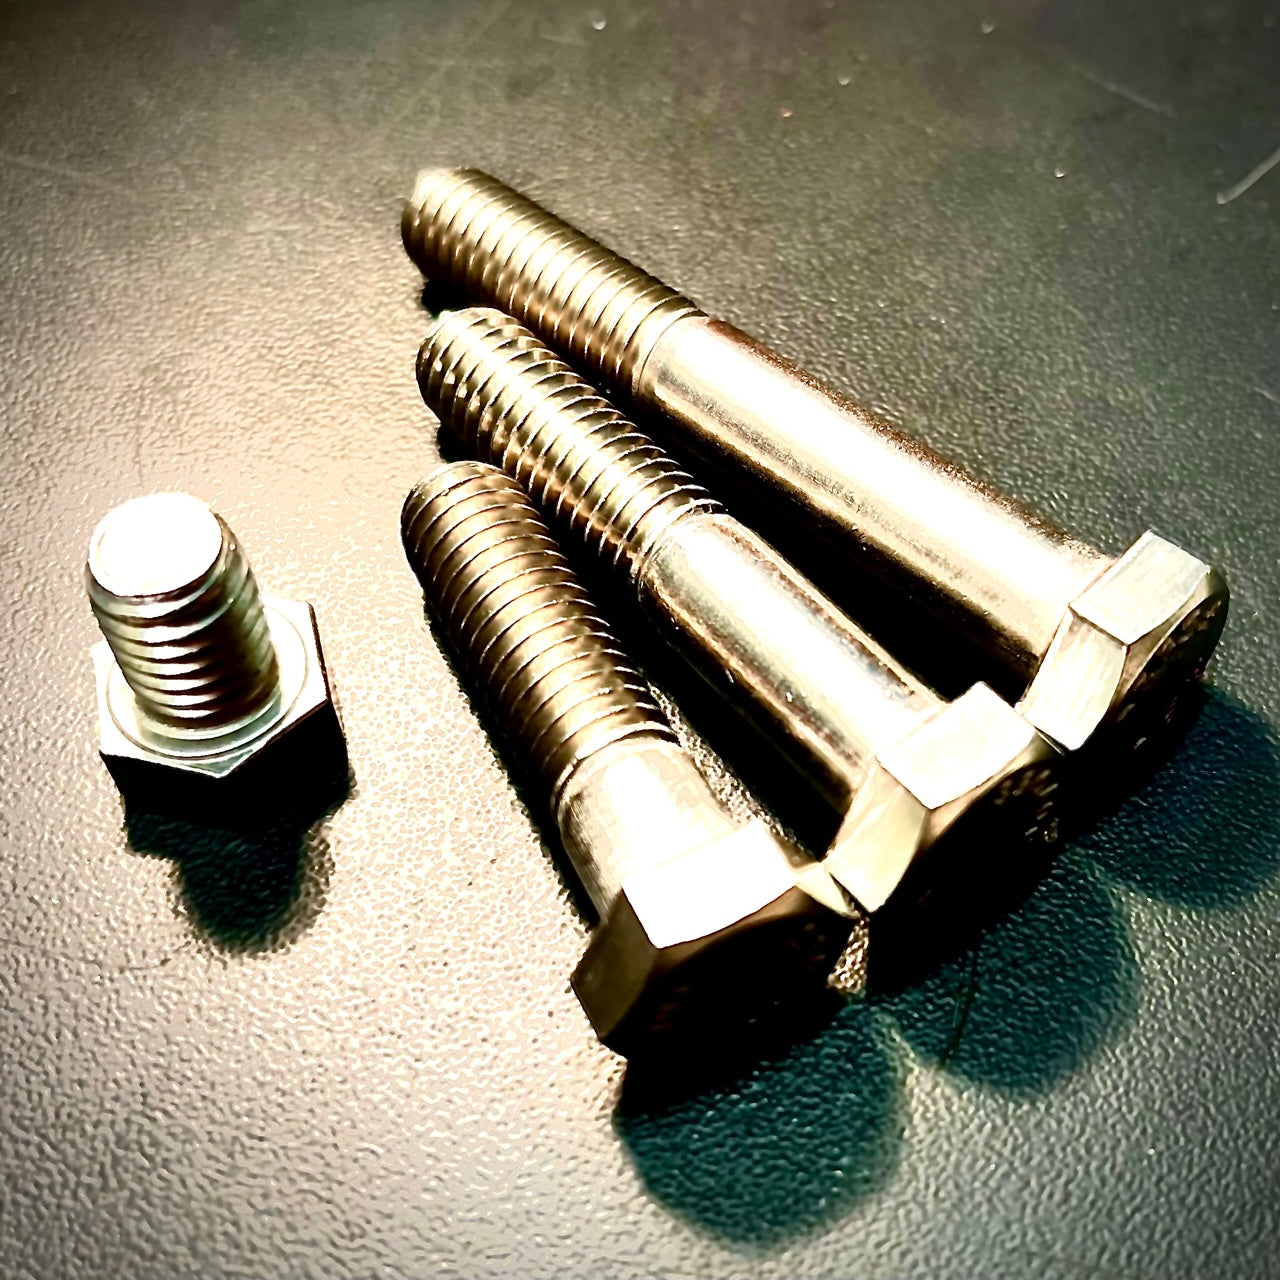 UNC 7/16" Hex Bolt and Set Screws A2 304 Stainless Steel DIN931 - Fixaball Ltd. Fixings and Fasteners UK